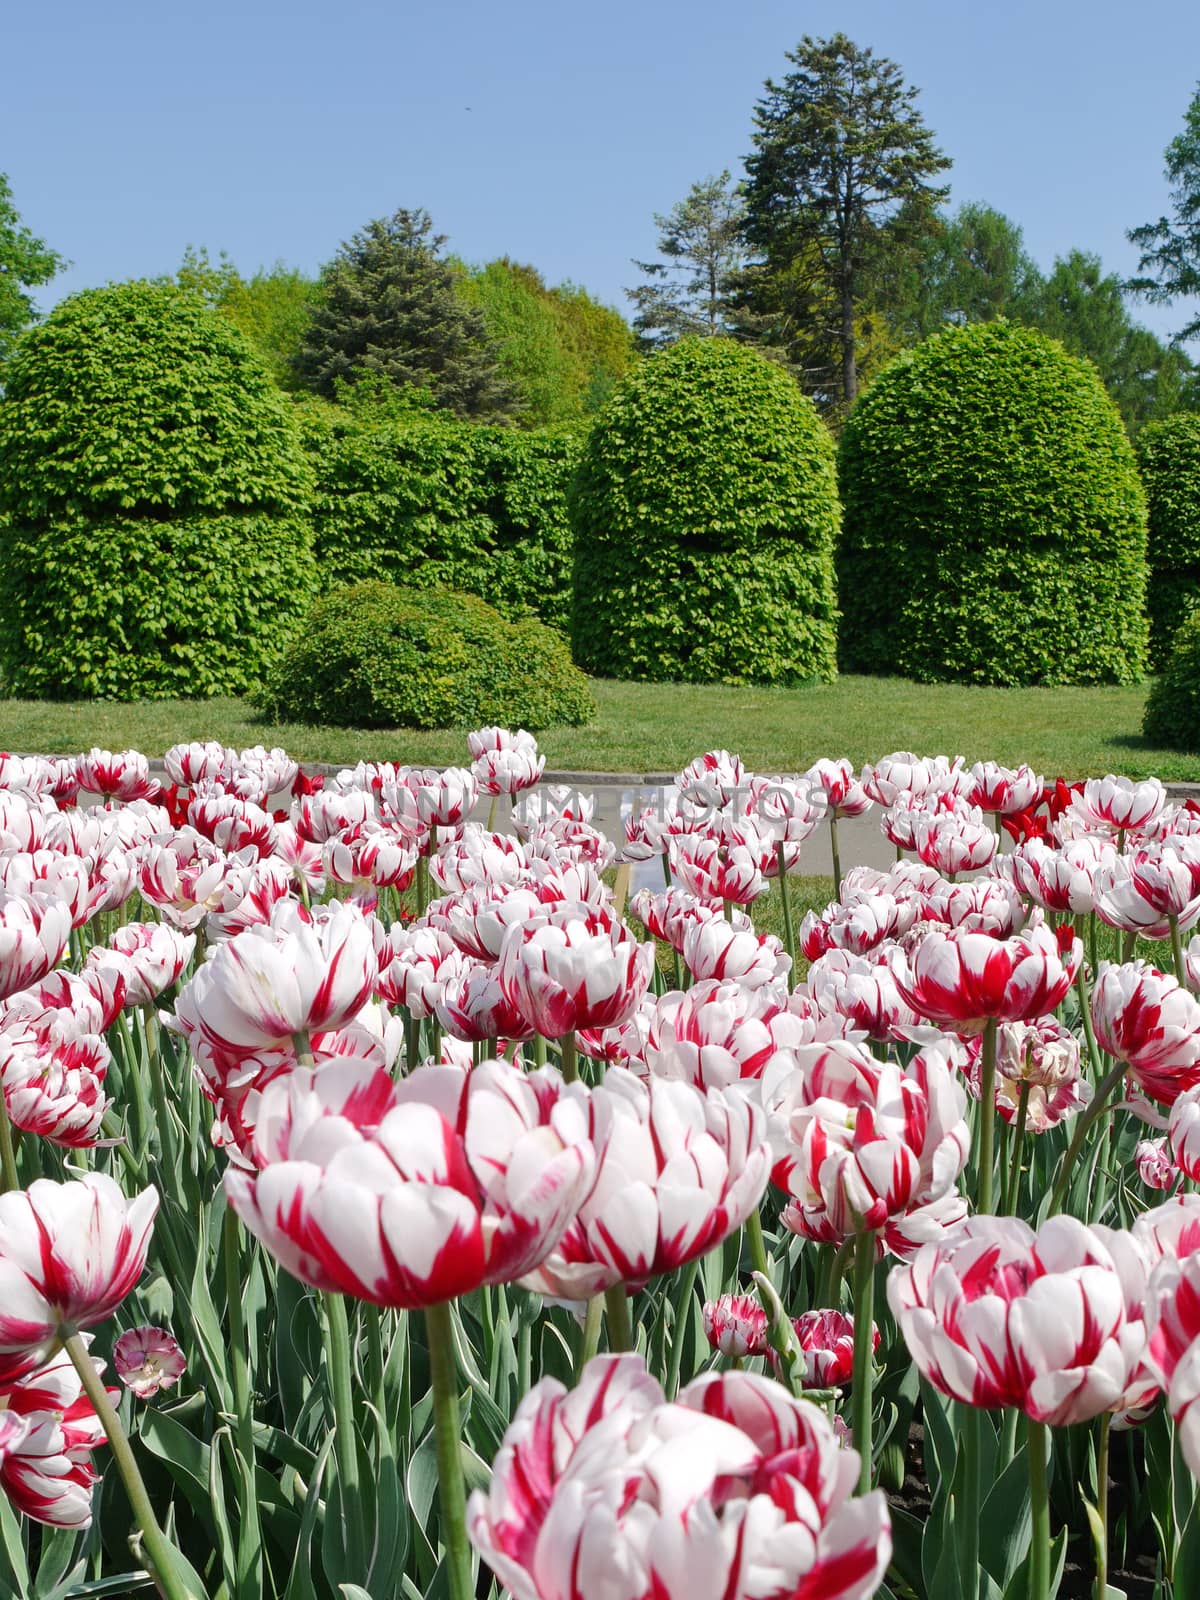 Field of white-red tulips. An unforgettable sight by Adamchuk